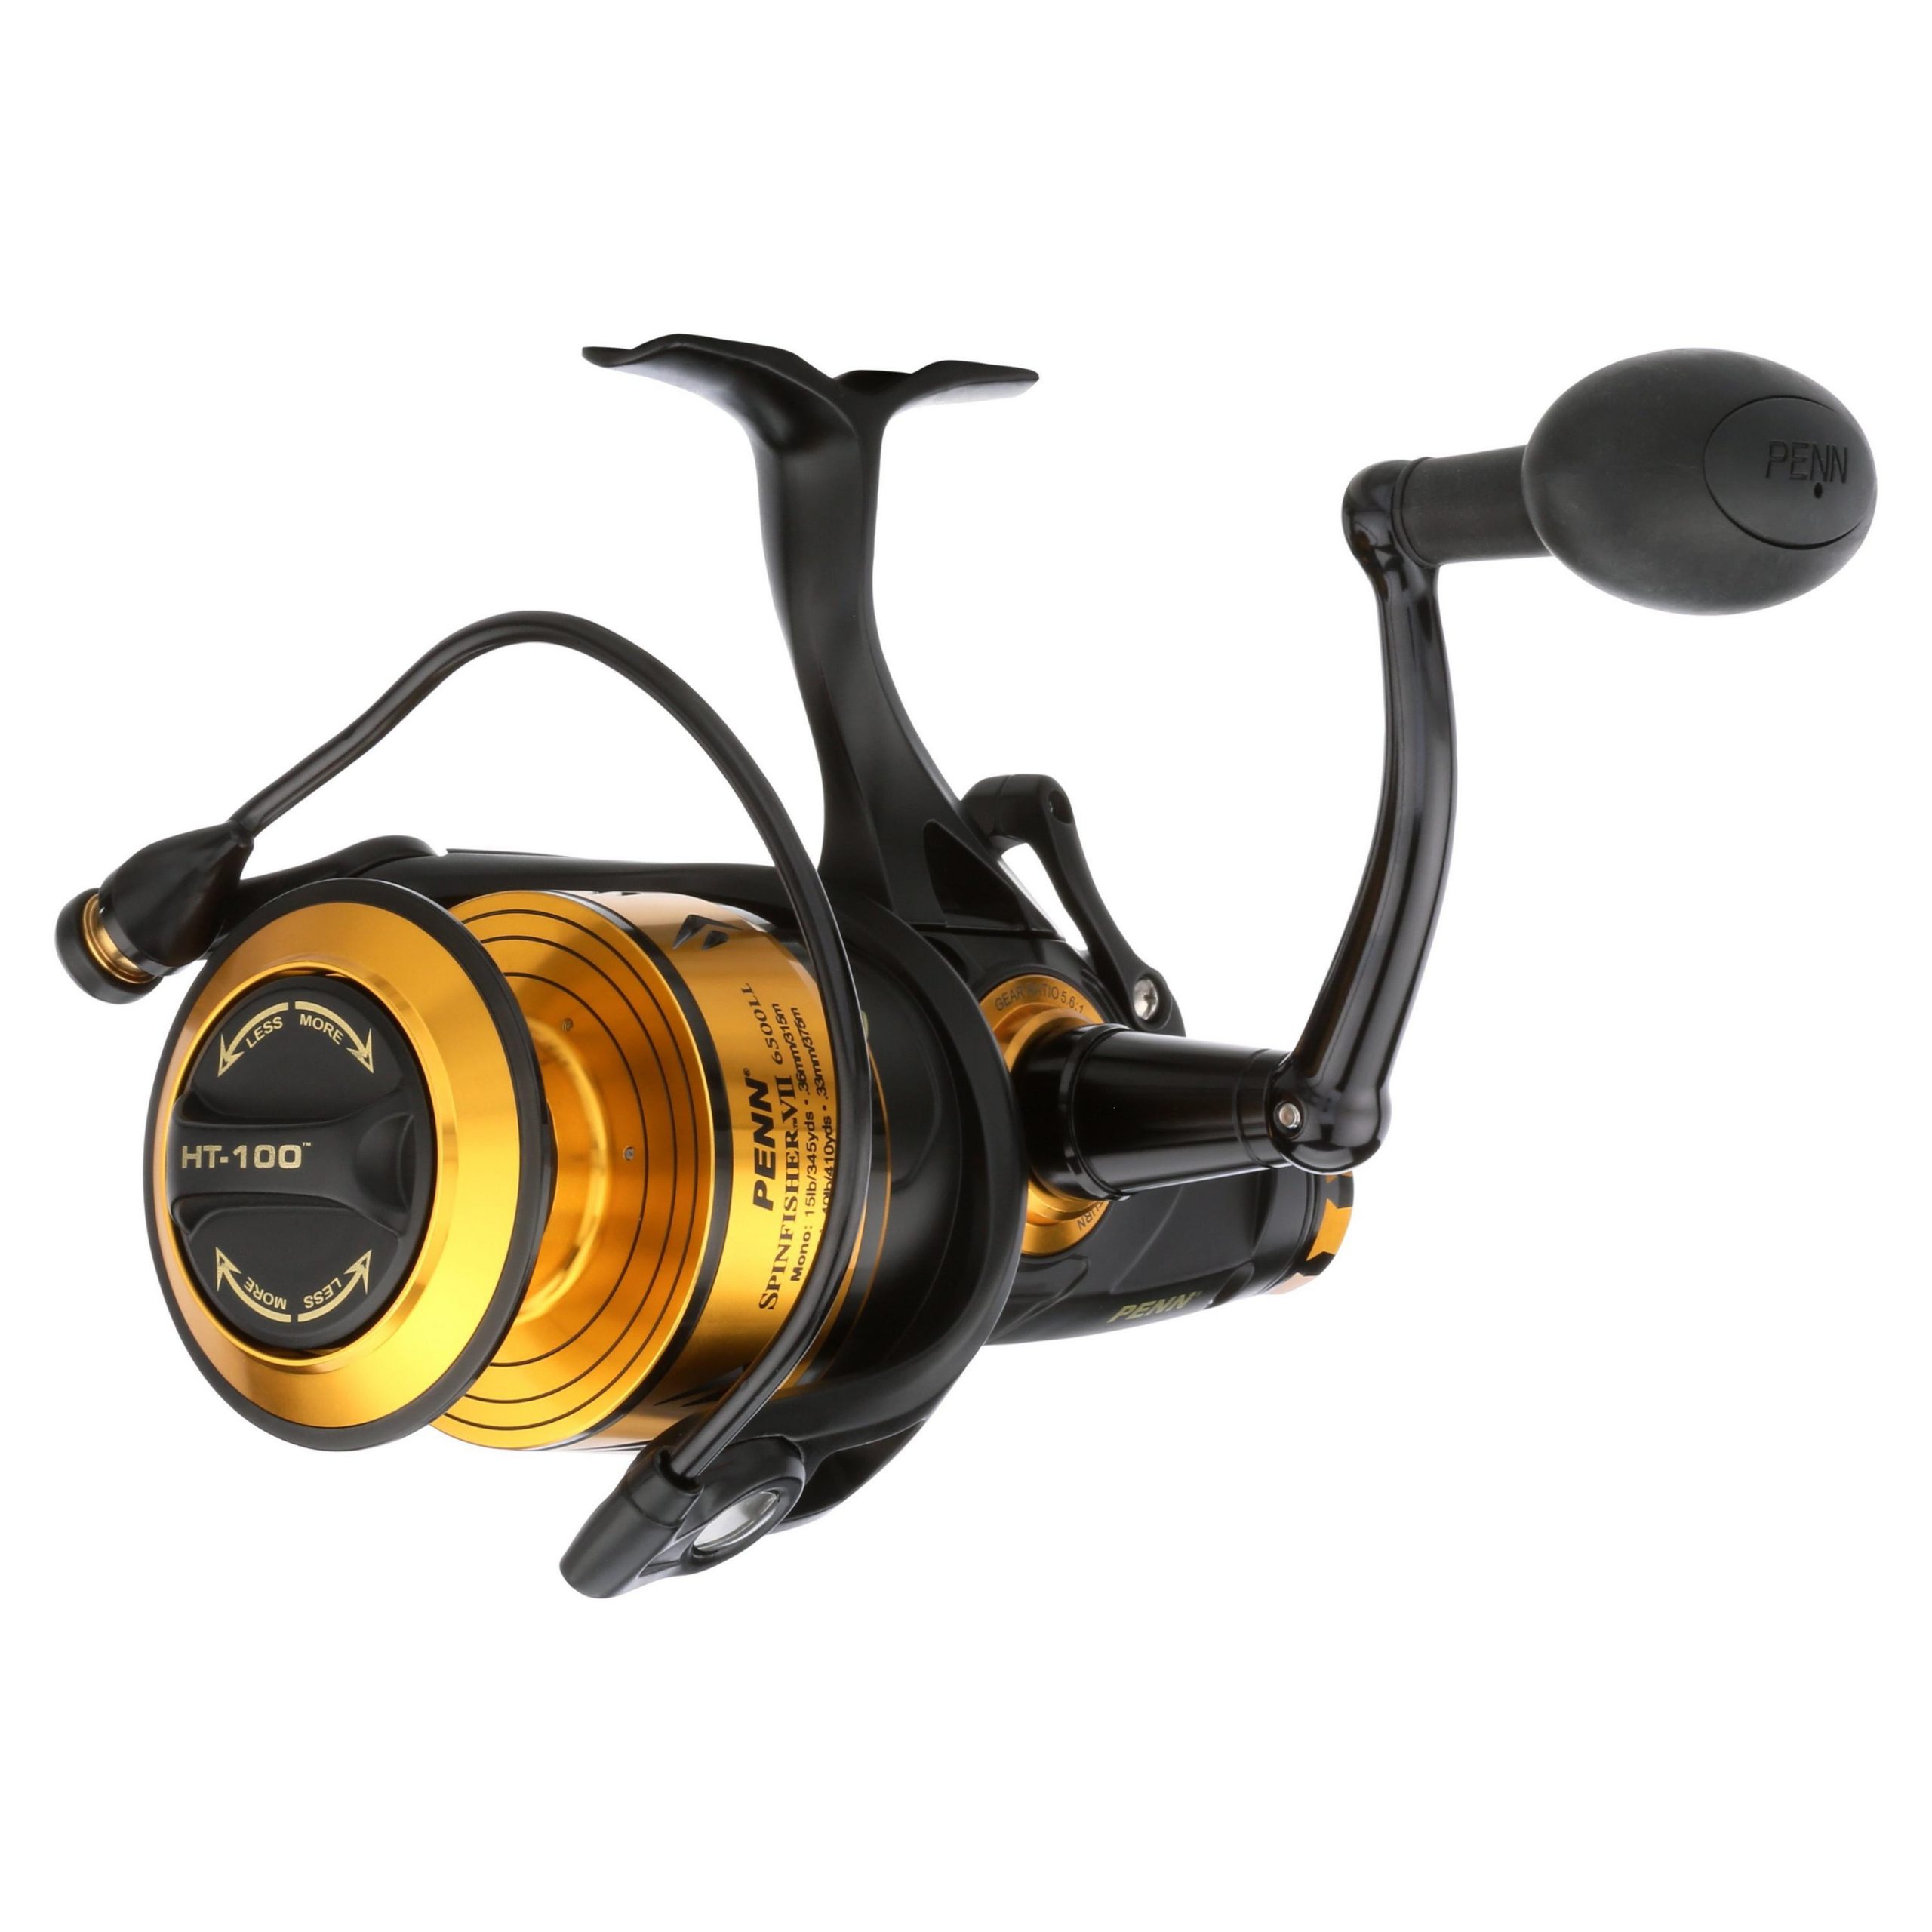 Spinfisher® VI Bailess Spinning Reel